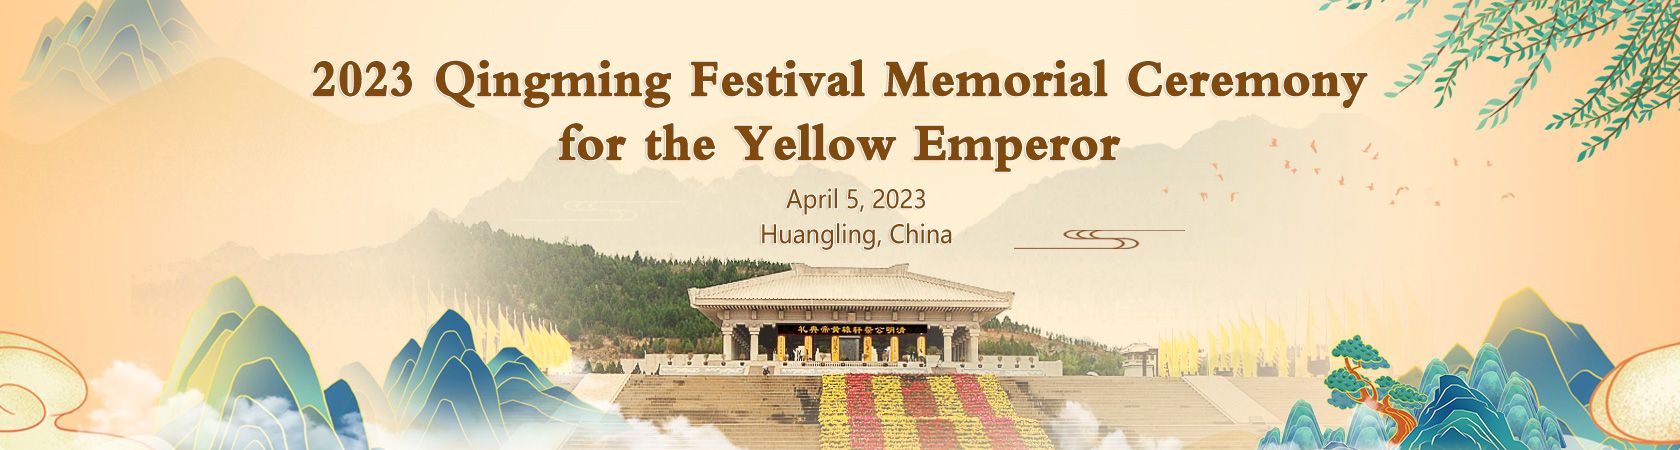 2023 Qingming Festival Memorial Ceremony for the Yellow Emperor